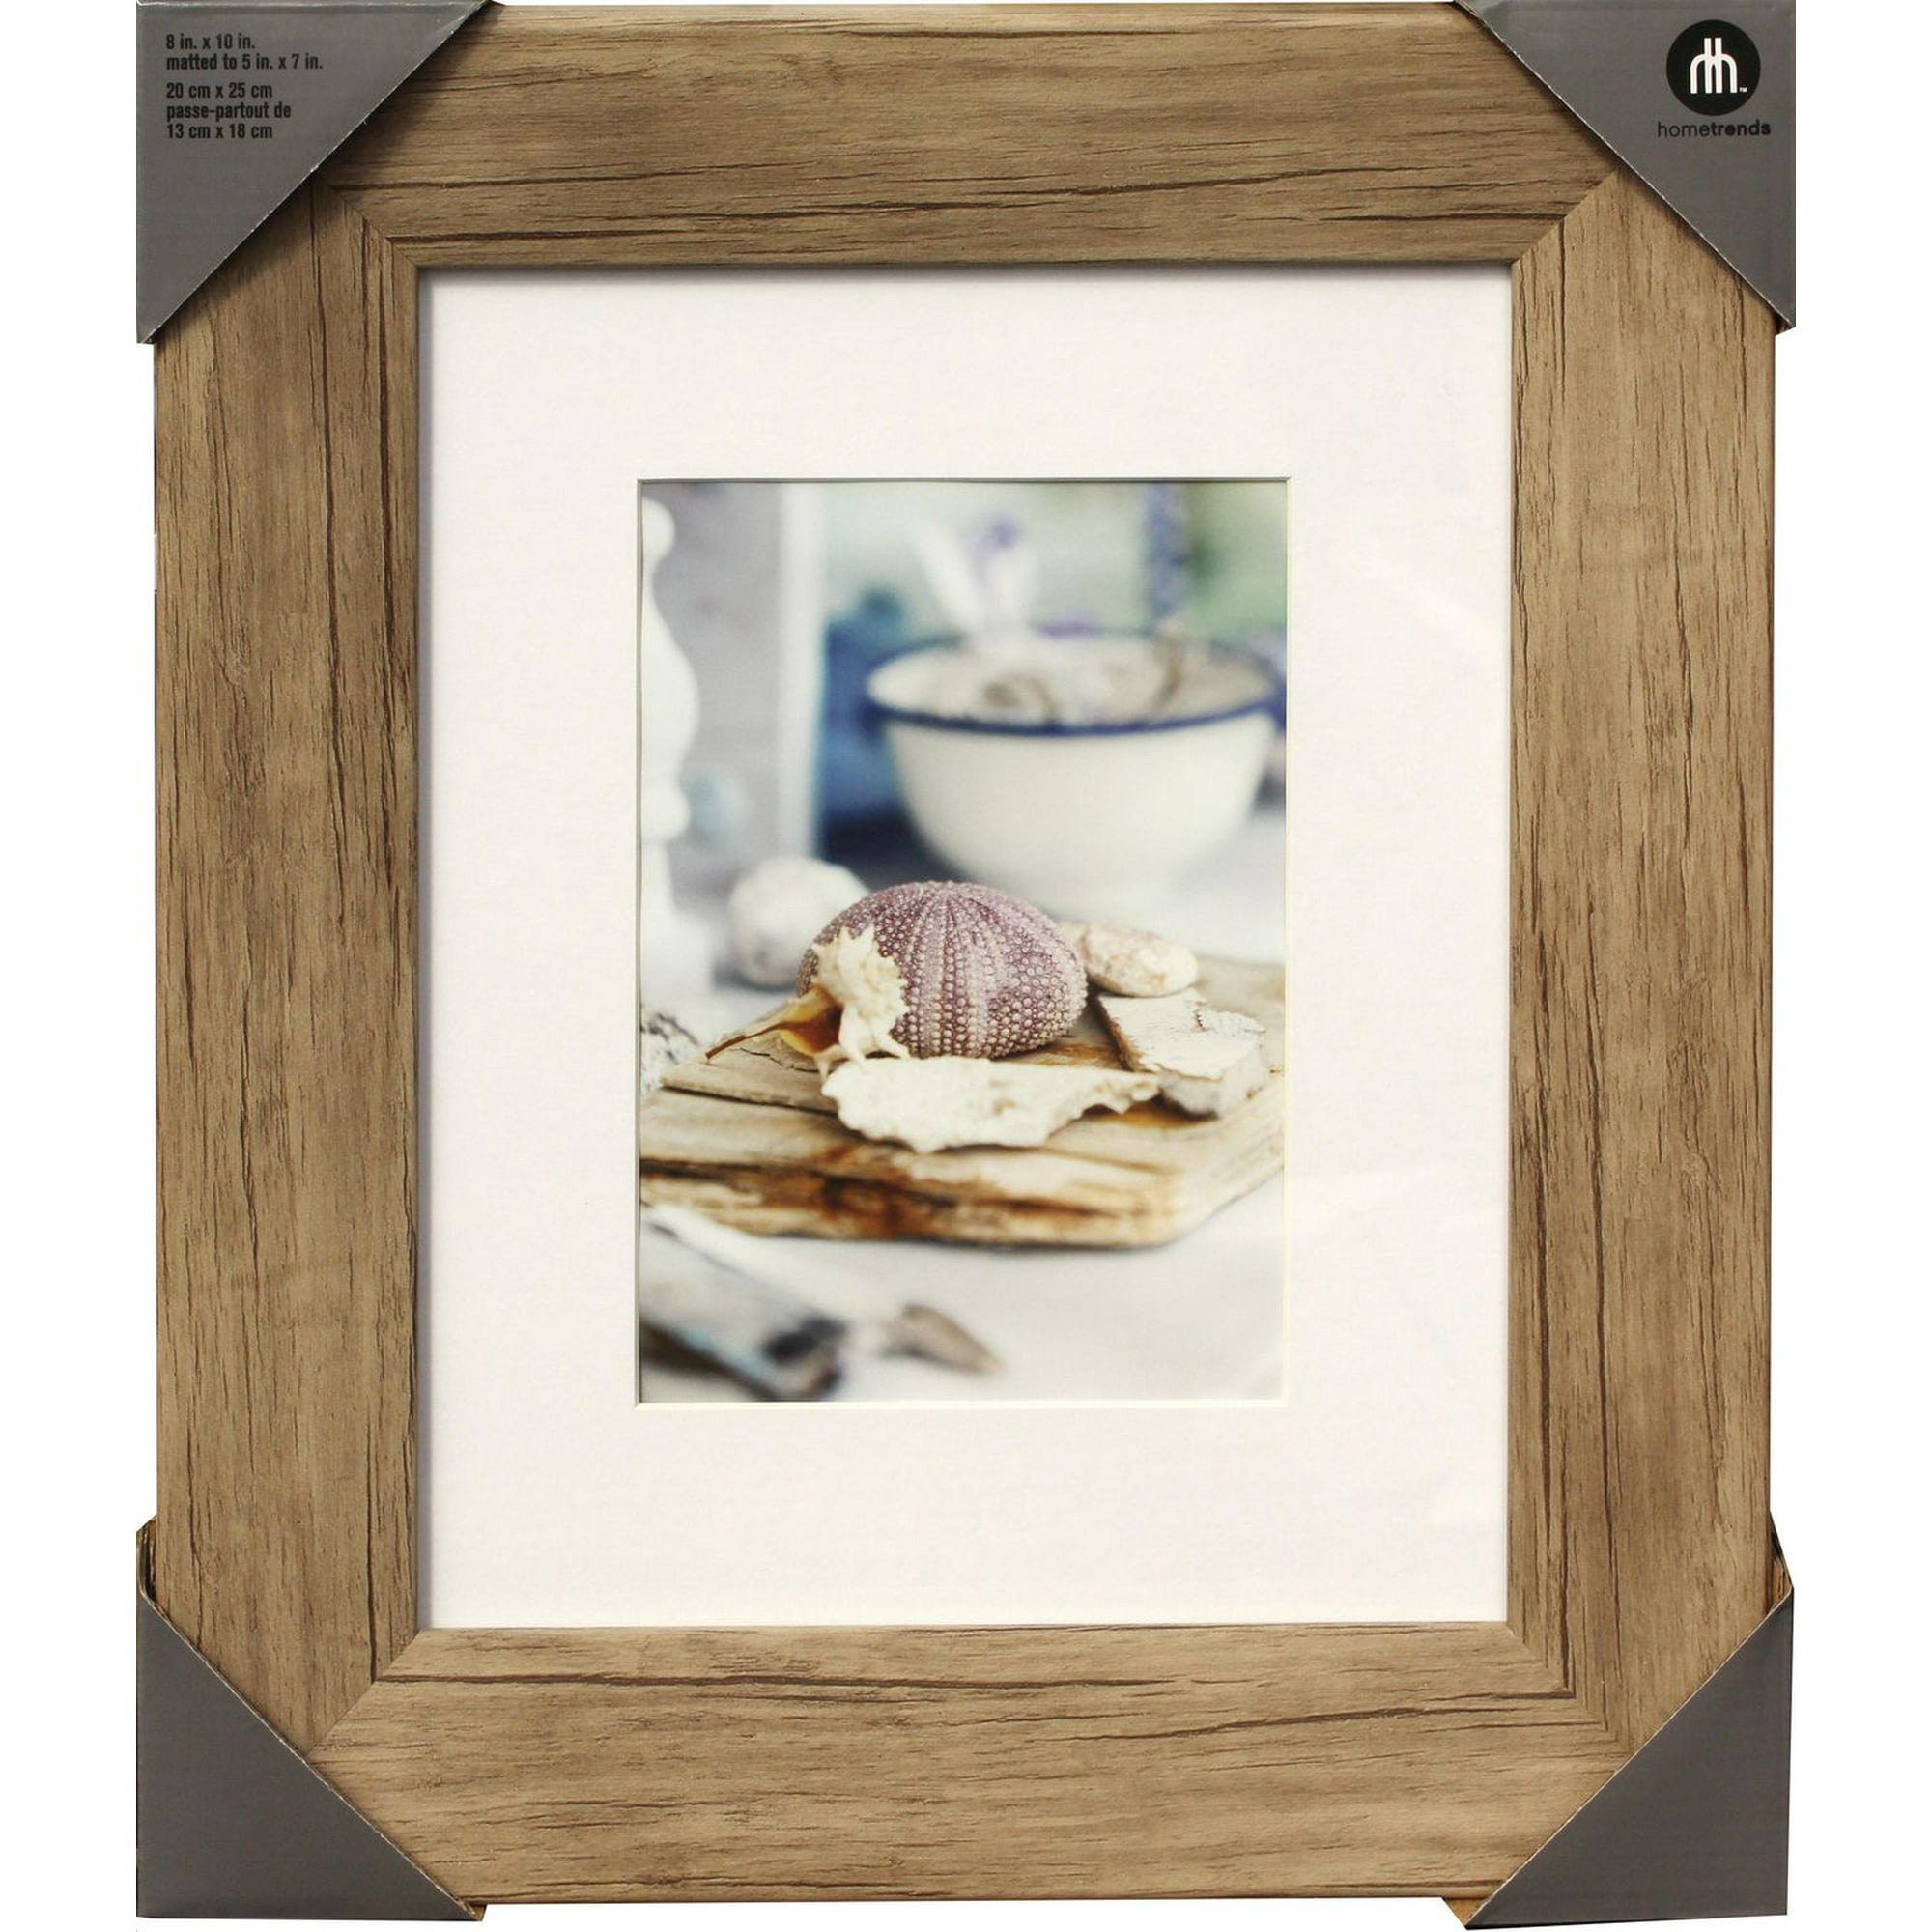 Fishing Pole Picture Frame - Metal Brown - Set of 4 Frames